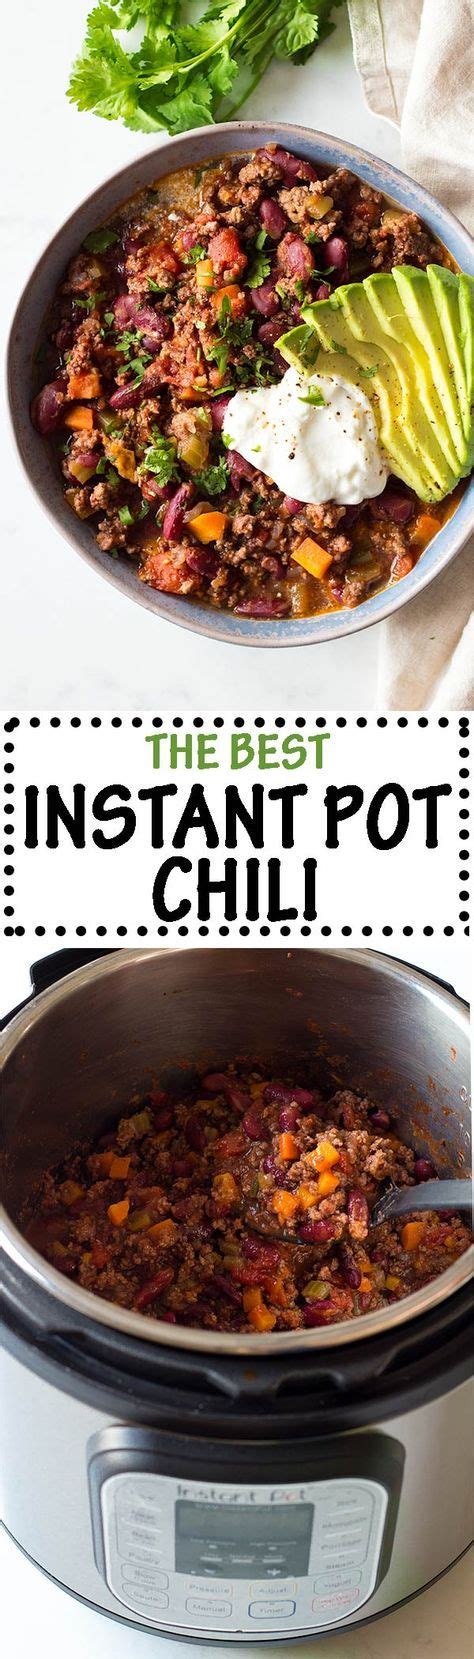 Instant pot chili with some corn bread is a family favorite meal. Delicious Instant Pot Chili | Recipe | Pressure cooker ...